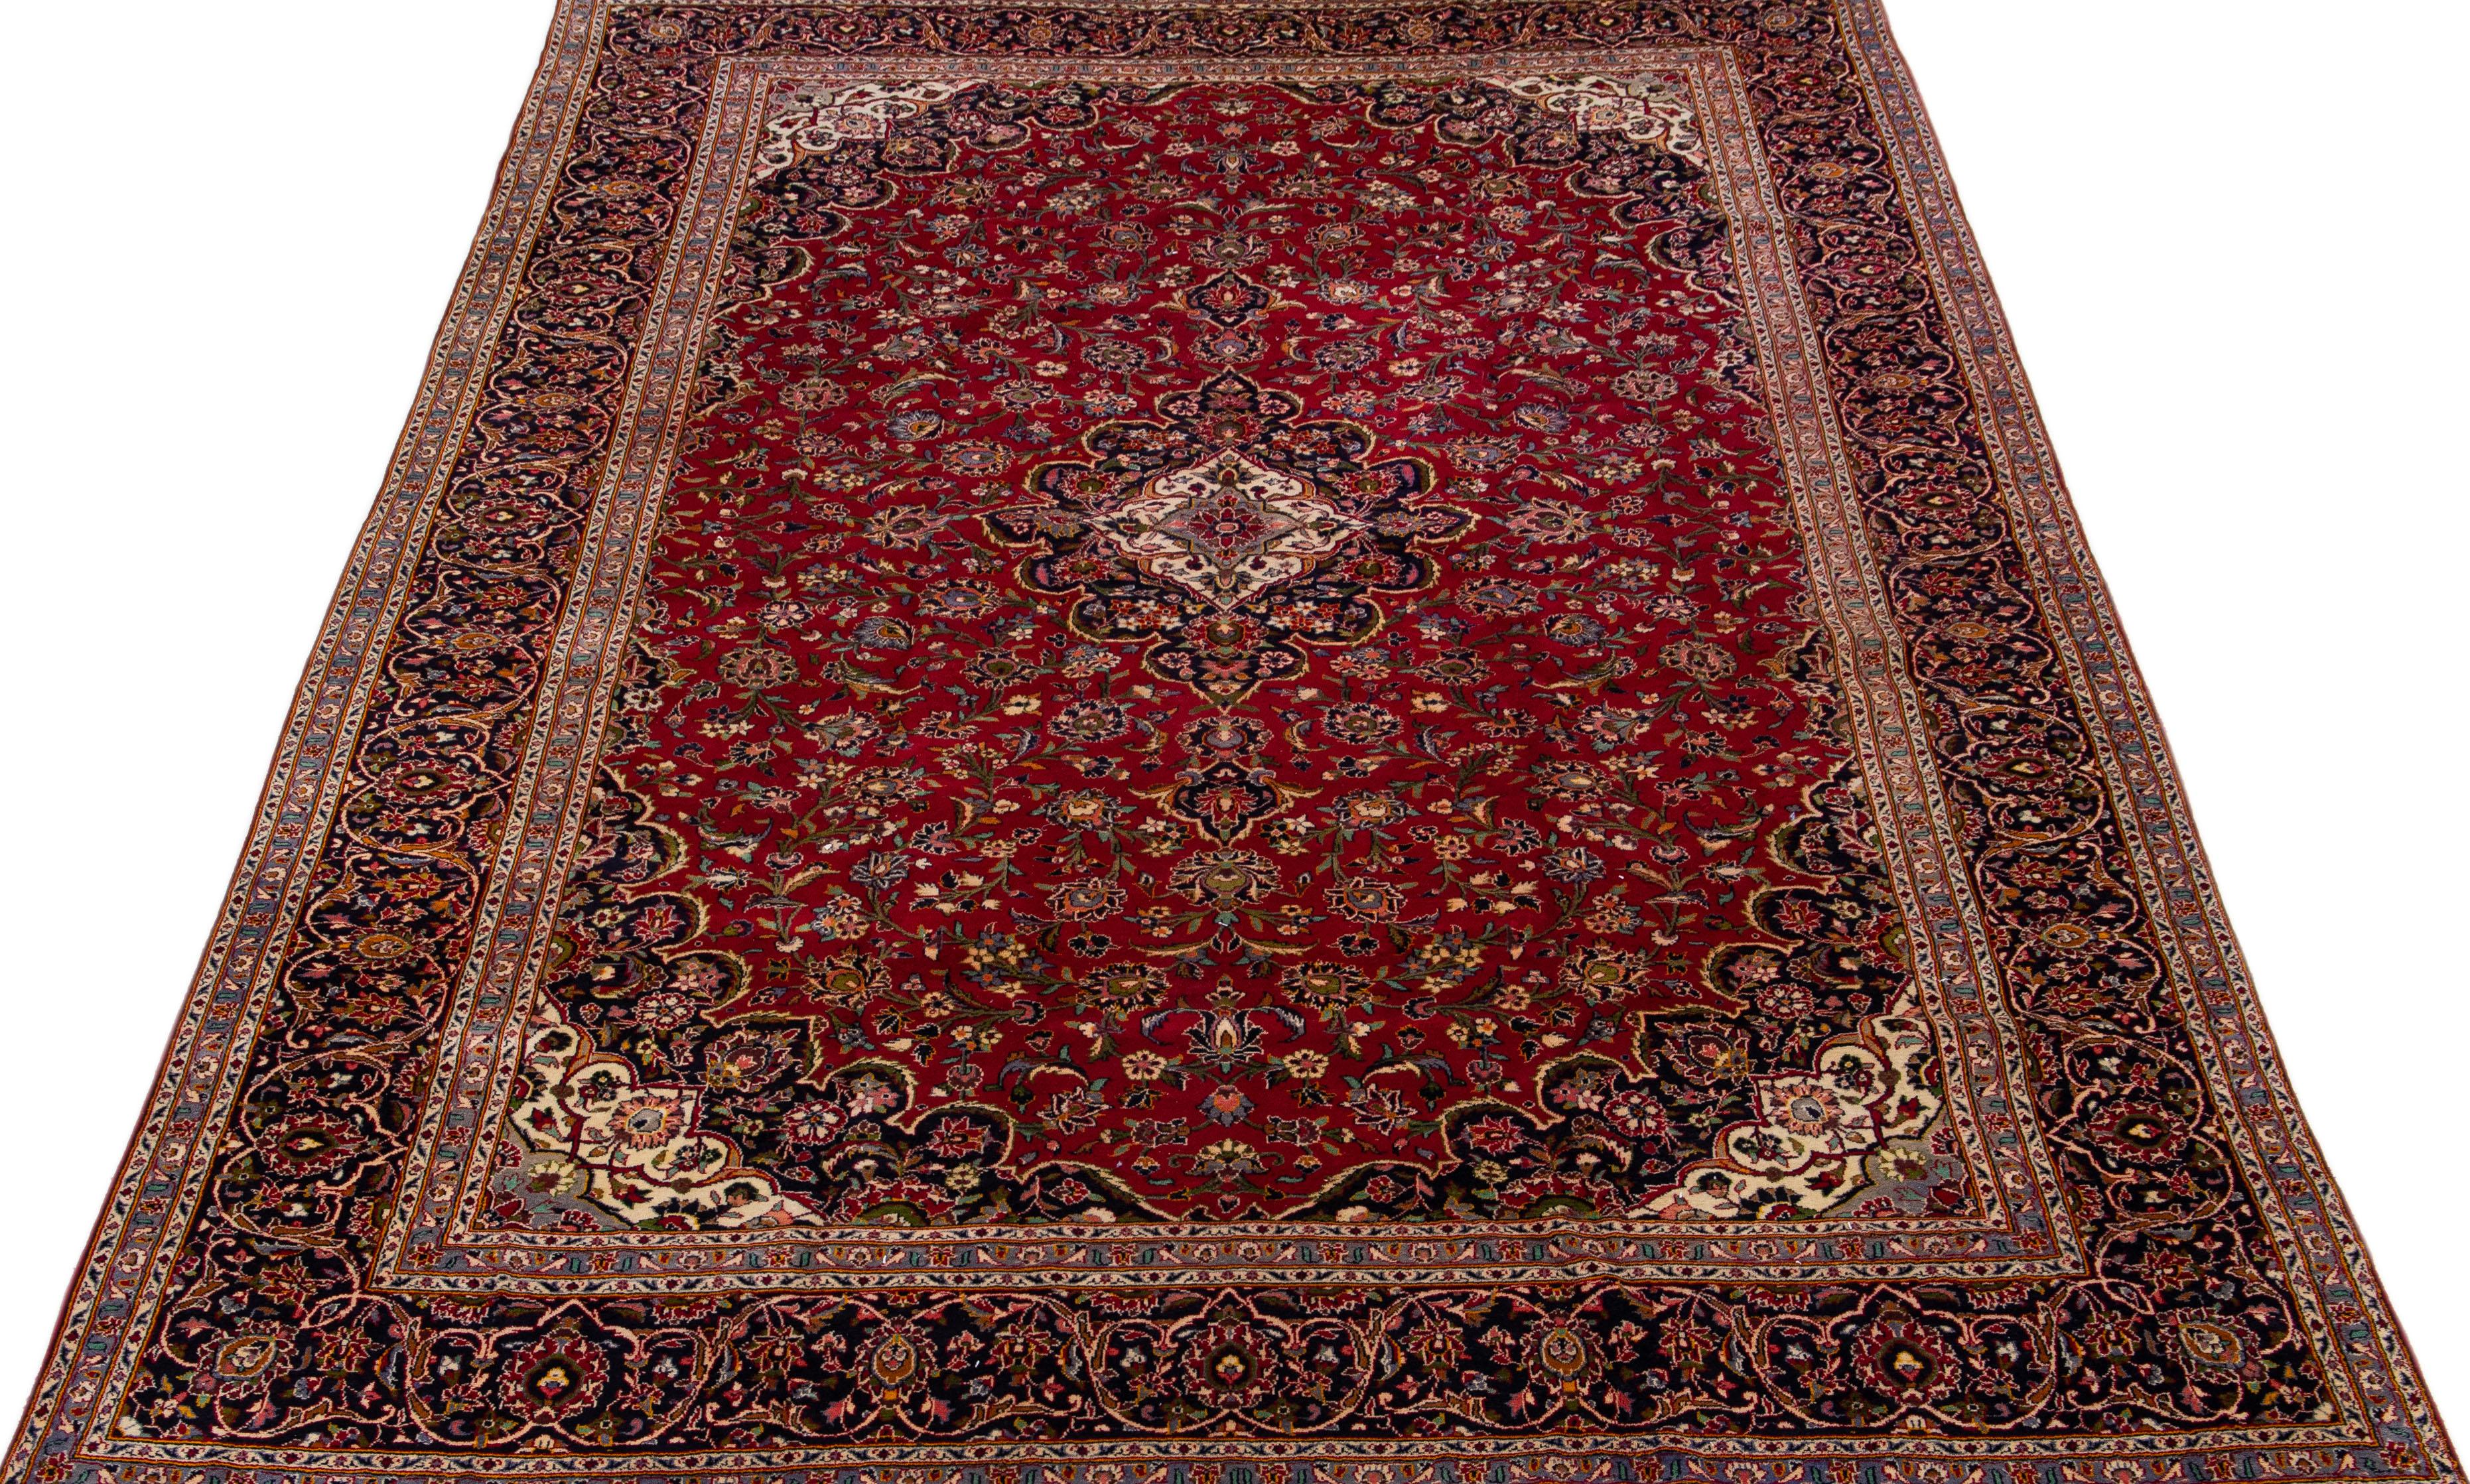 Beautiful antique Kashan hand-knotted wool rug with a red color field. This Persian rug has a navy blue frame and multicolor accents in a gorgeous all-over medallion floral design. 

This rug measures 11' x 16'8